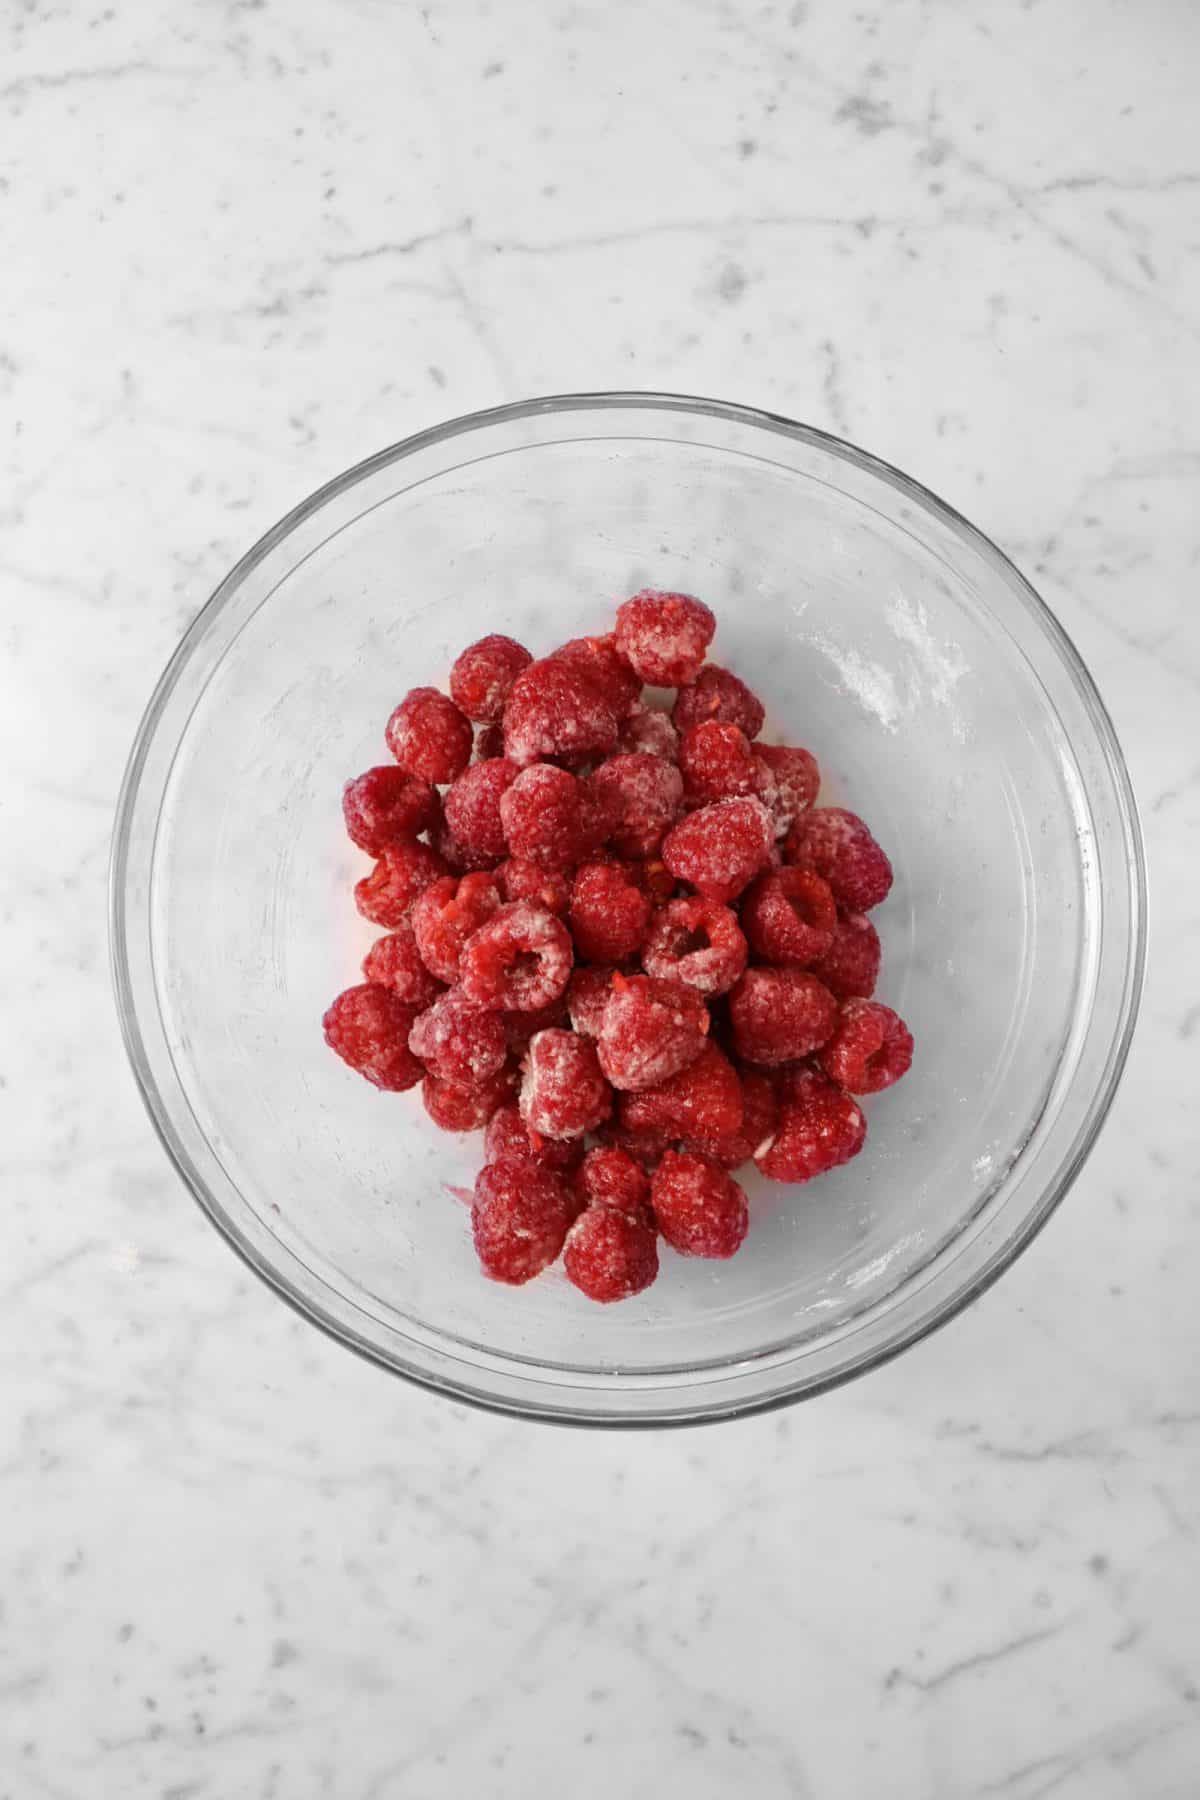 Raspberries, flour, and sugar mixed together